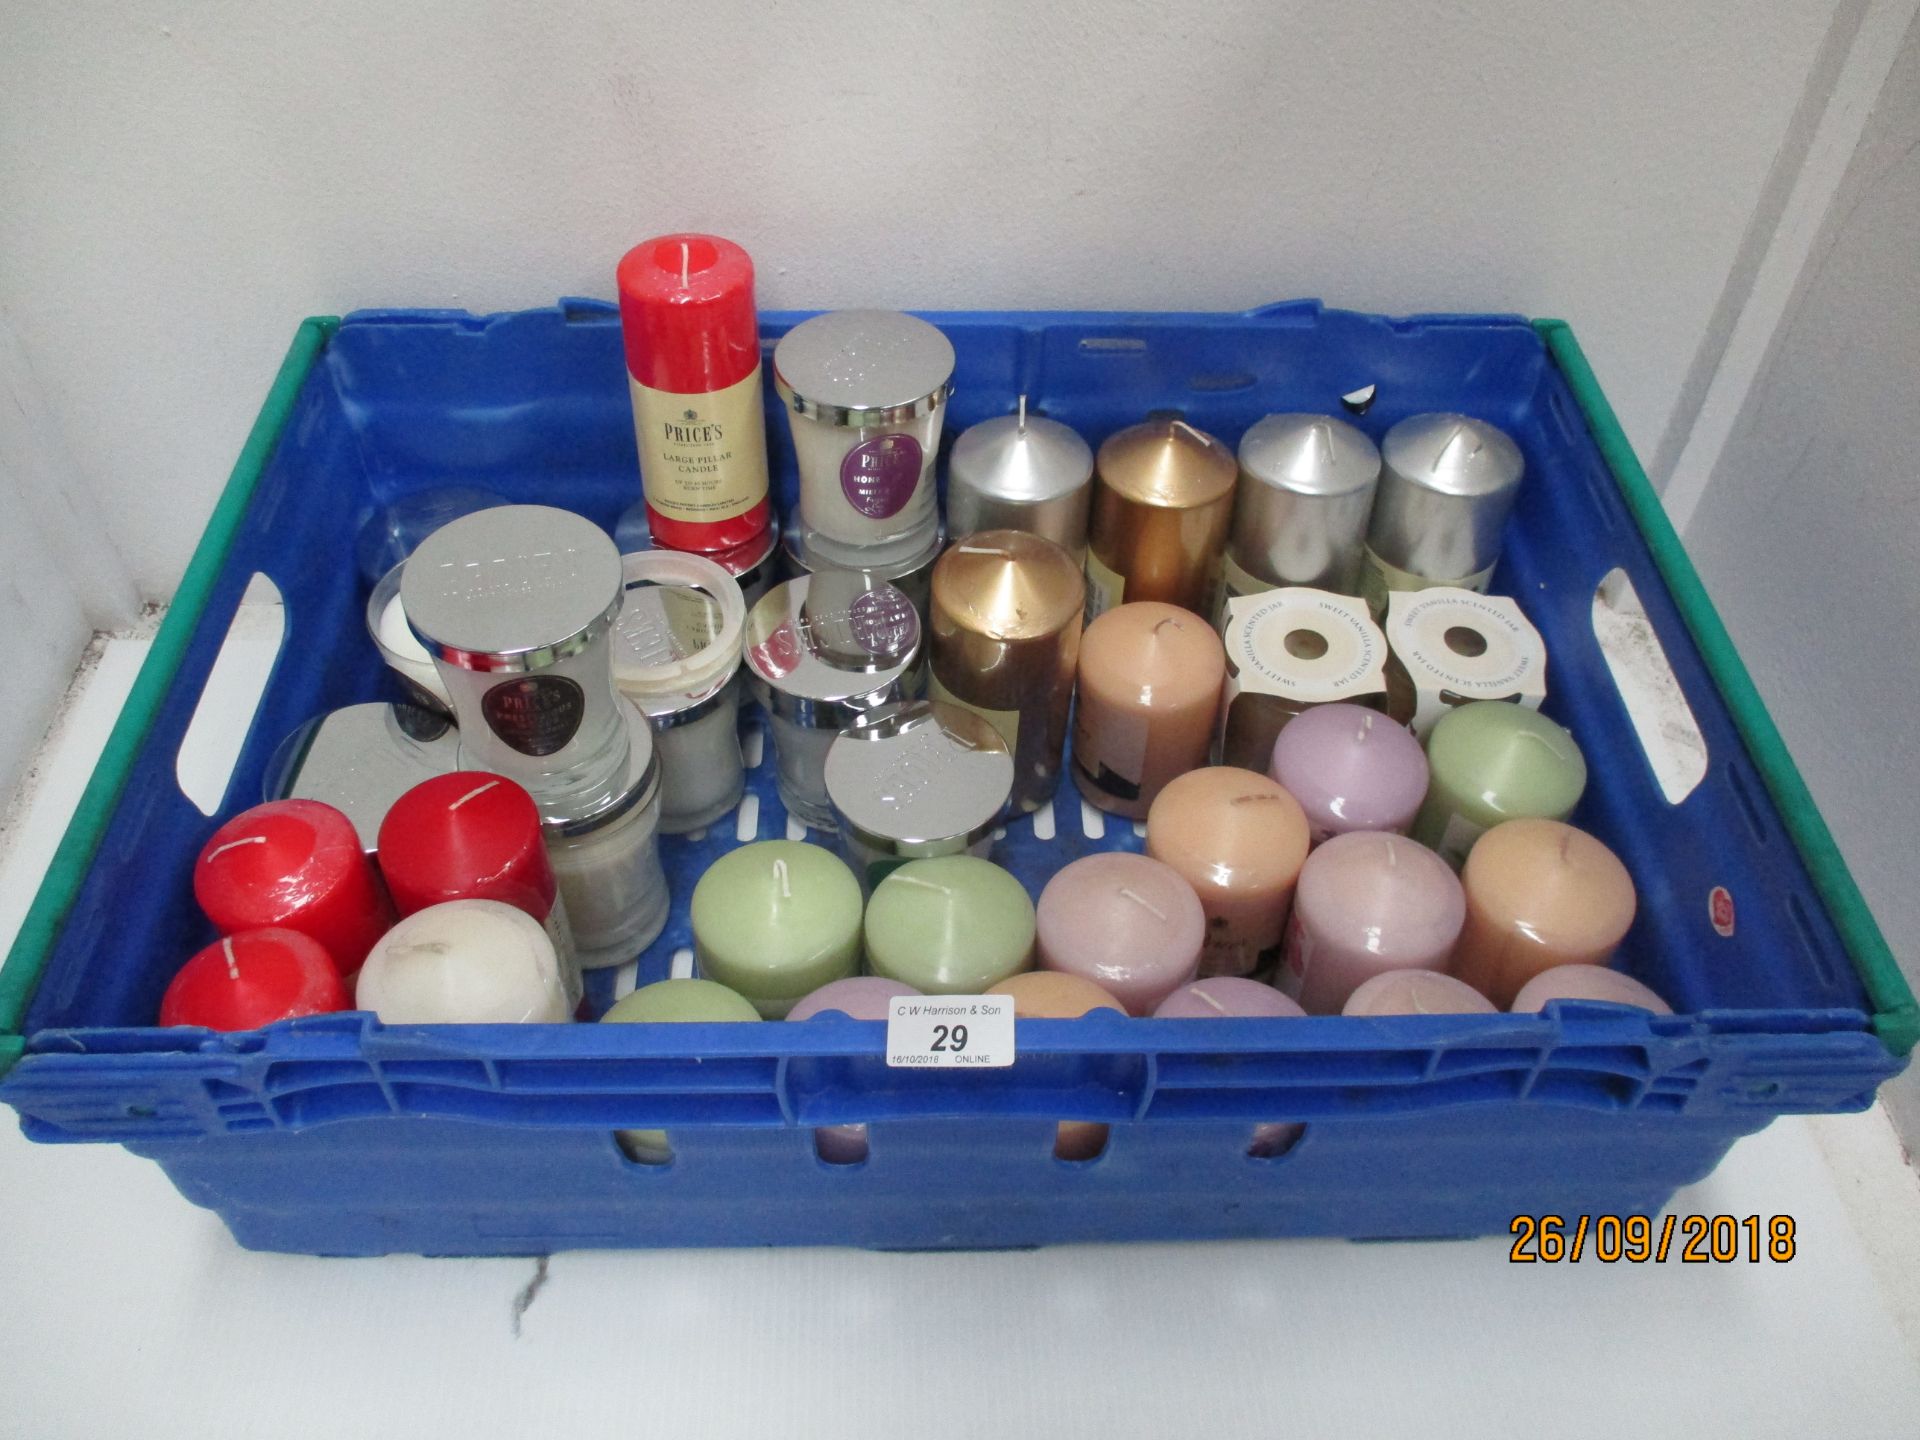 38 x assorted Price's candles